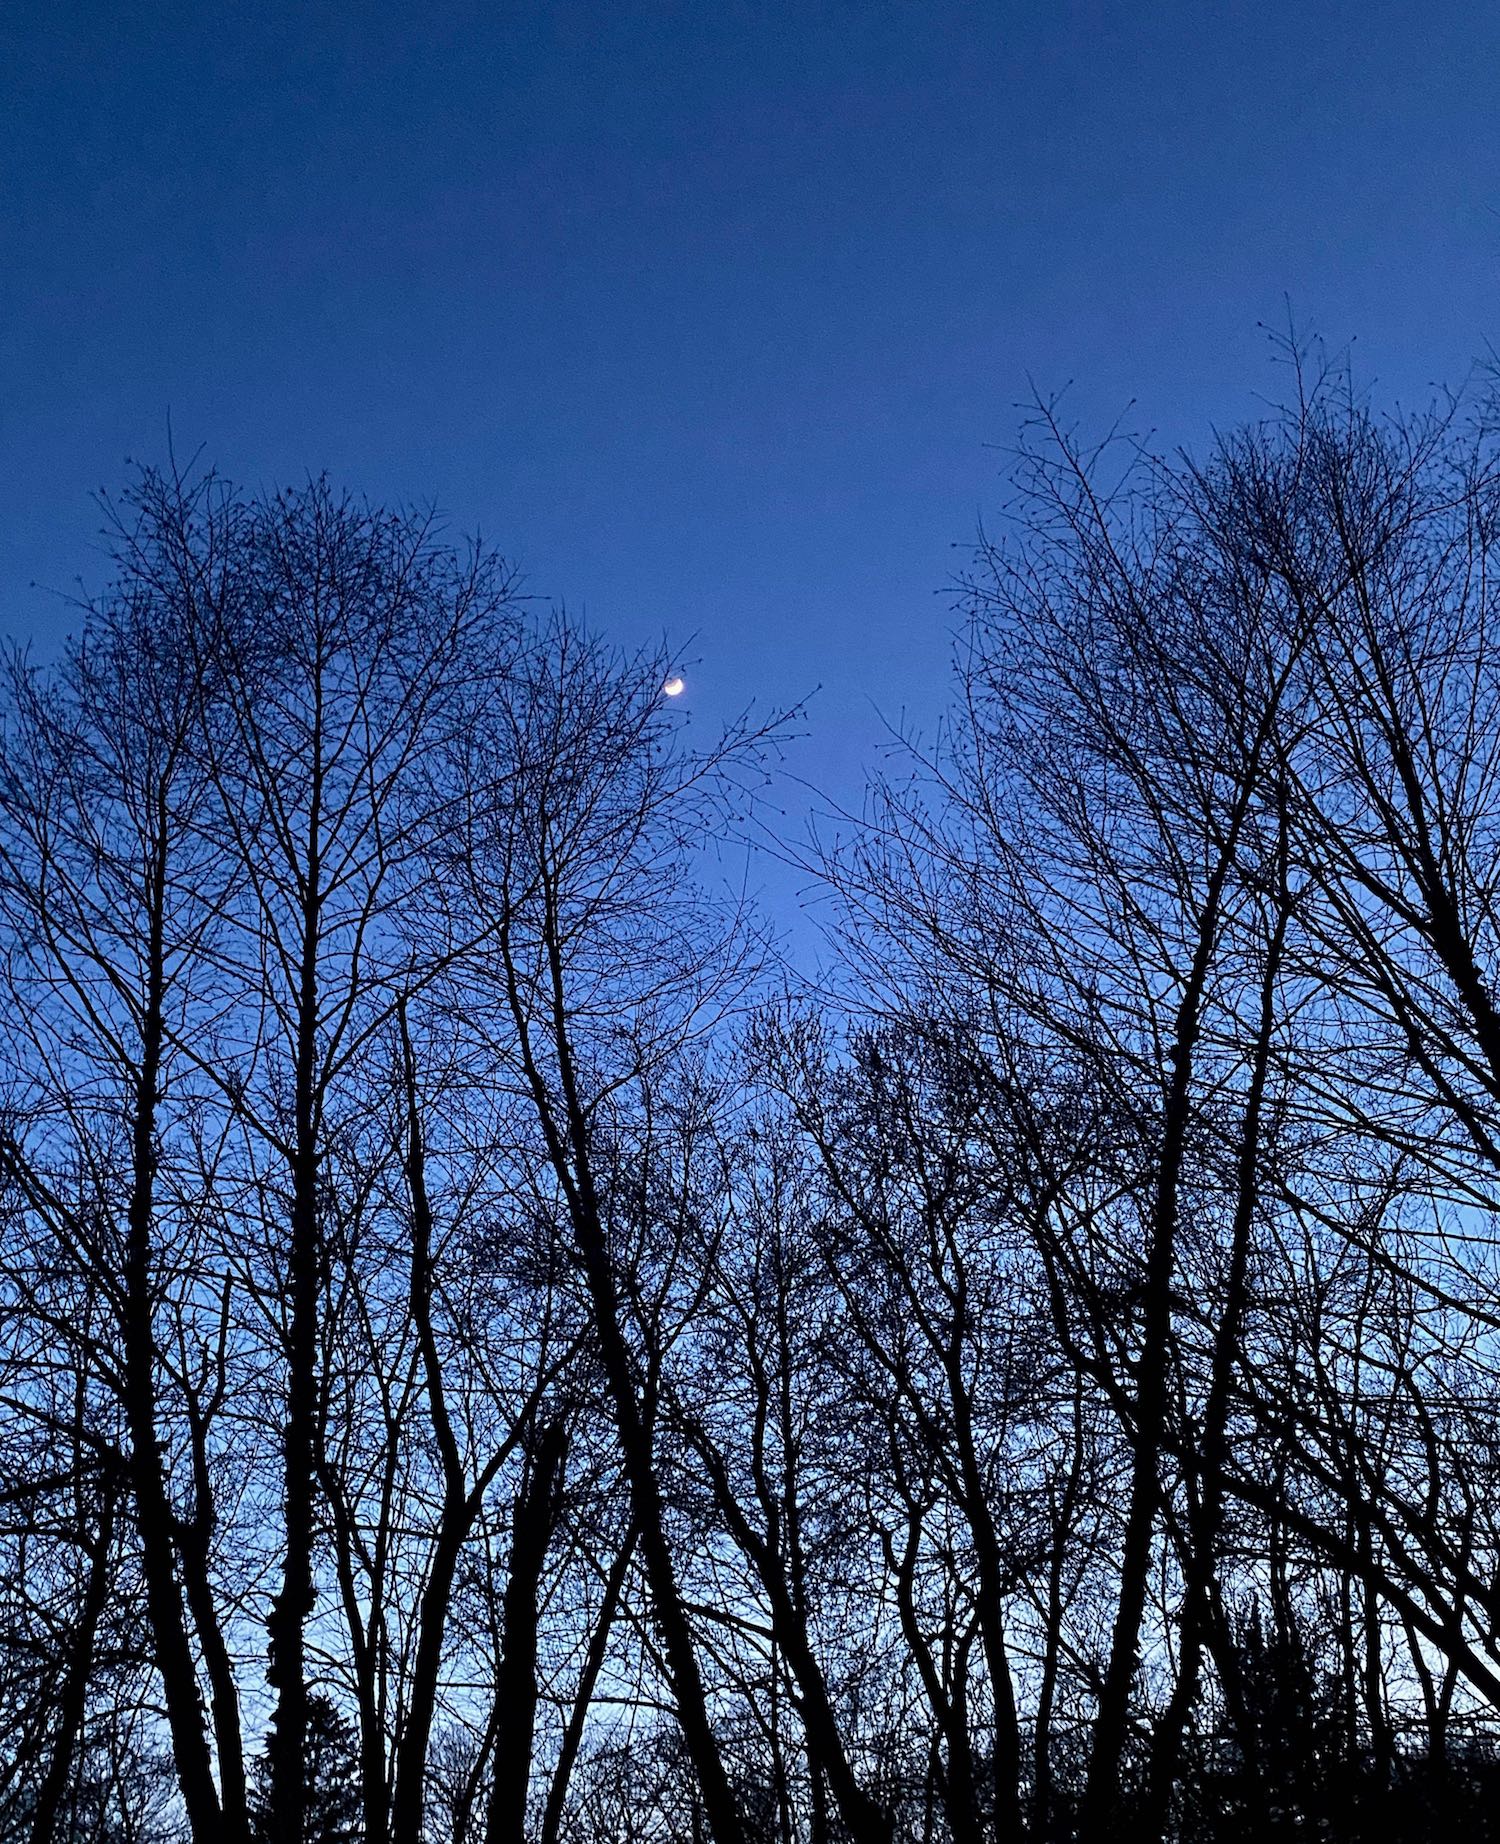 It's the weekend! Number 244, Dusk and the Moon in My Backyard